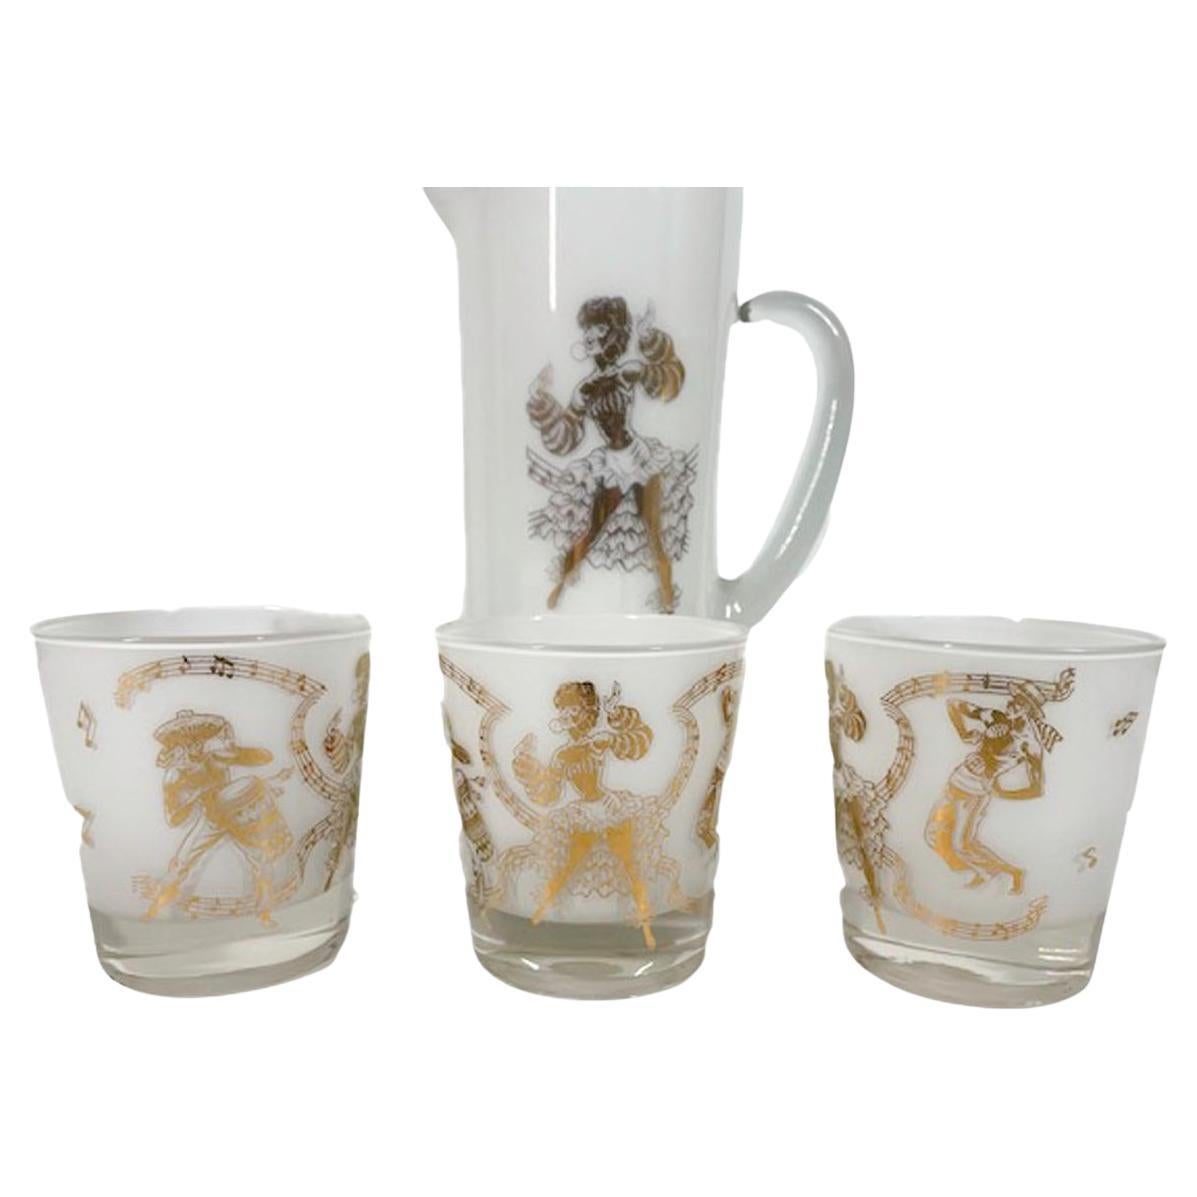 Nine-piece cocktail pitcher set, clear glass with white frosted interiors having Calypso performers in 22 karat gold on the exterior. Set consists of a large pitcher with applied handle and ice dam lip along with 8 old fashioned glasses.